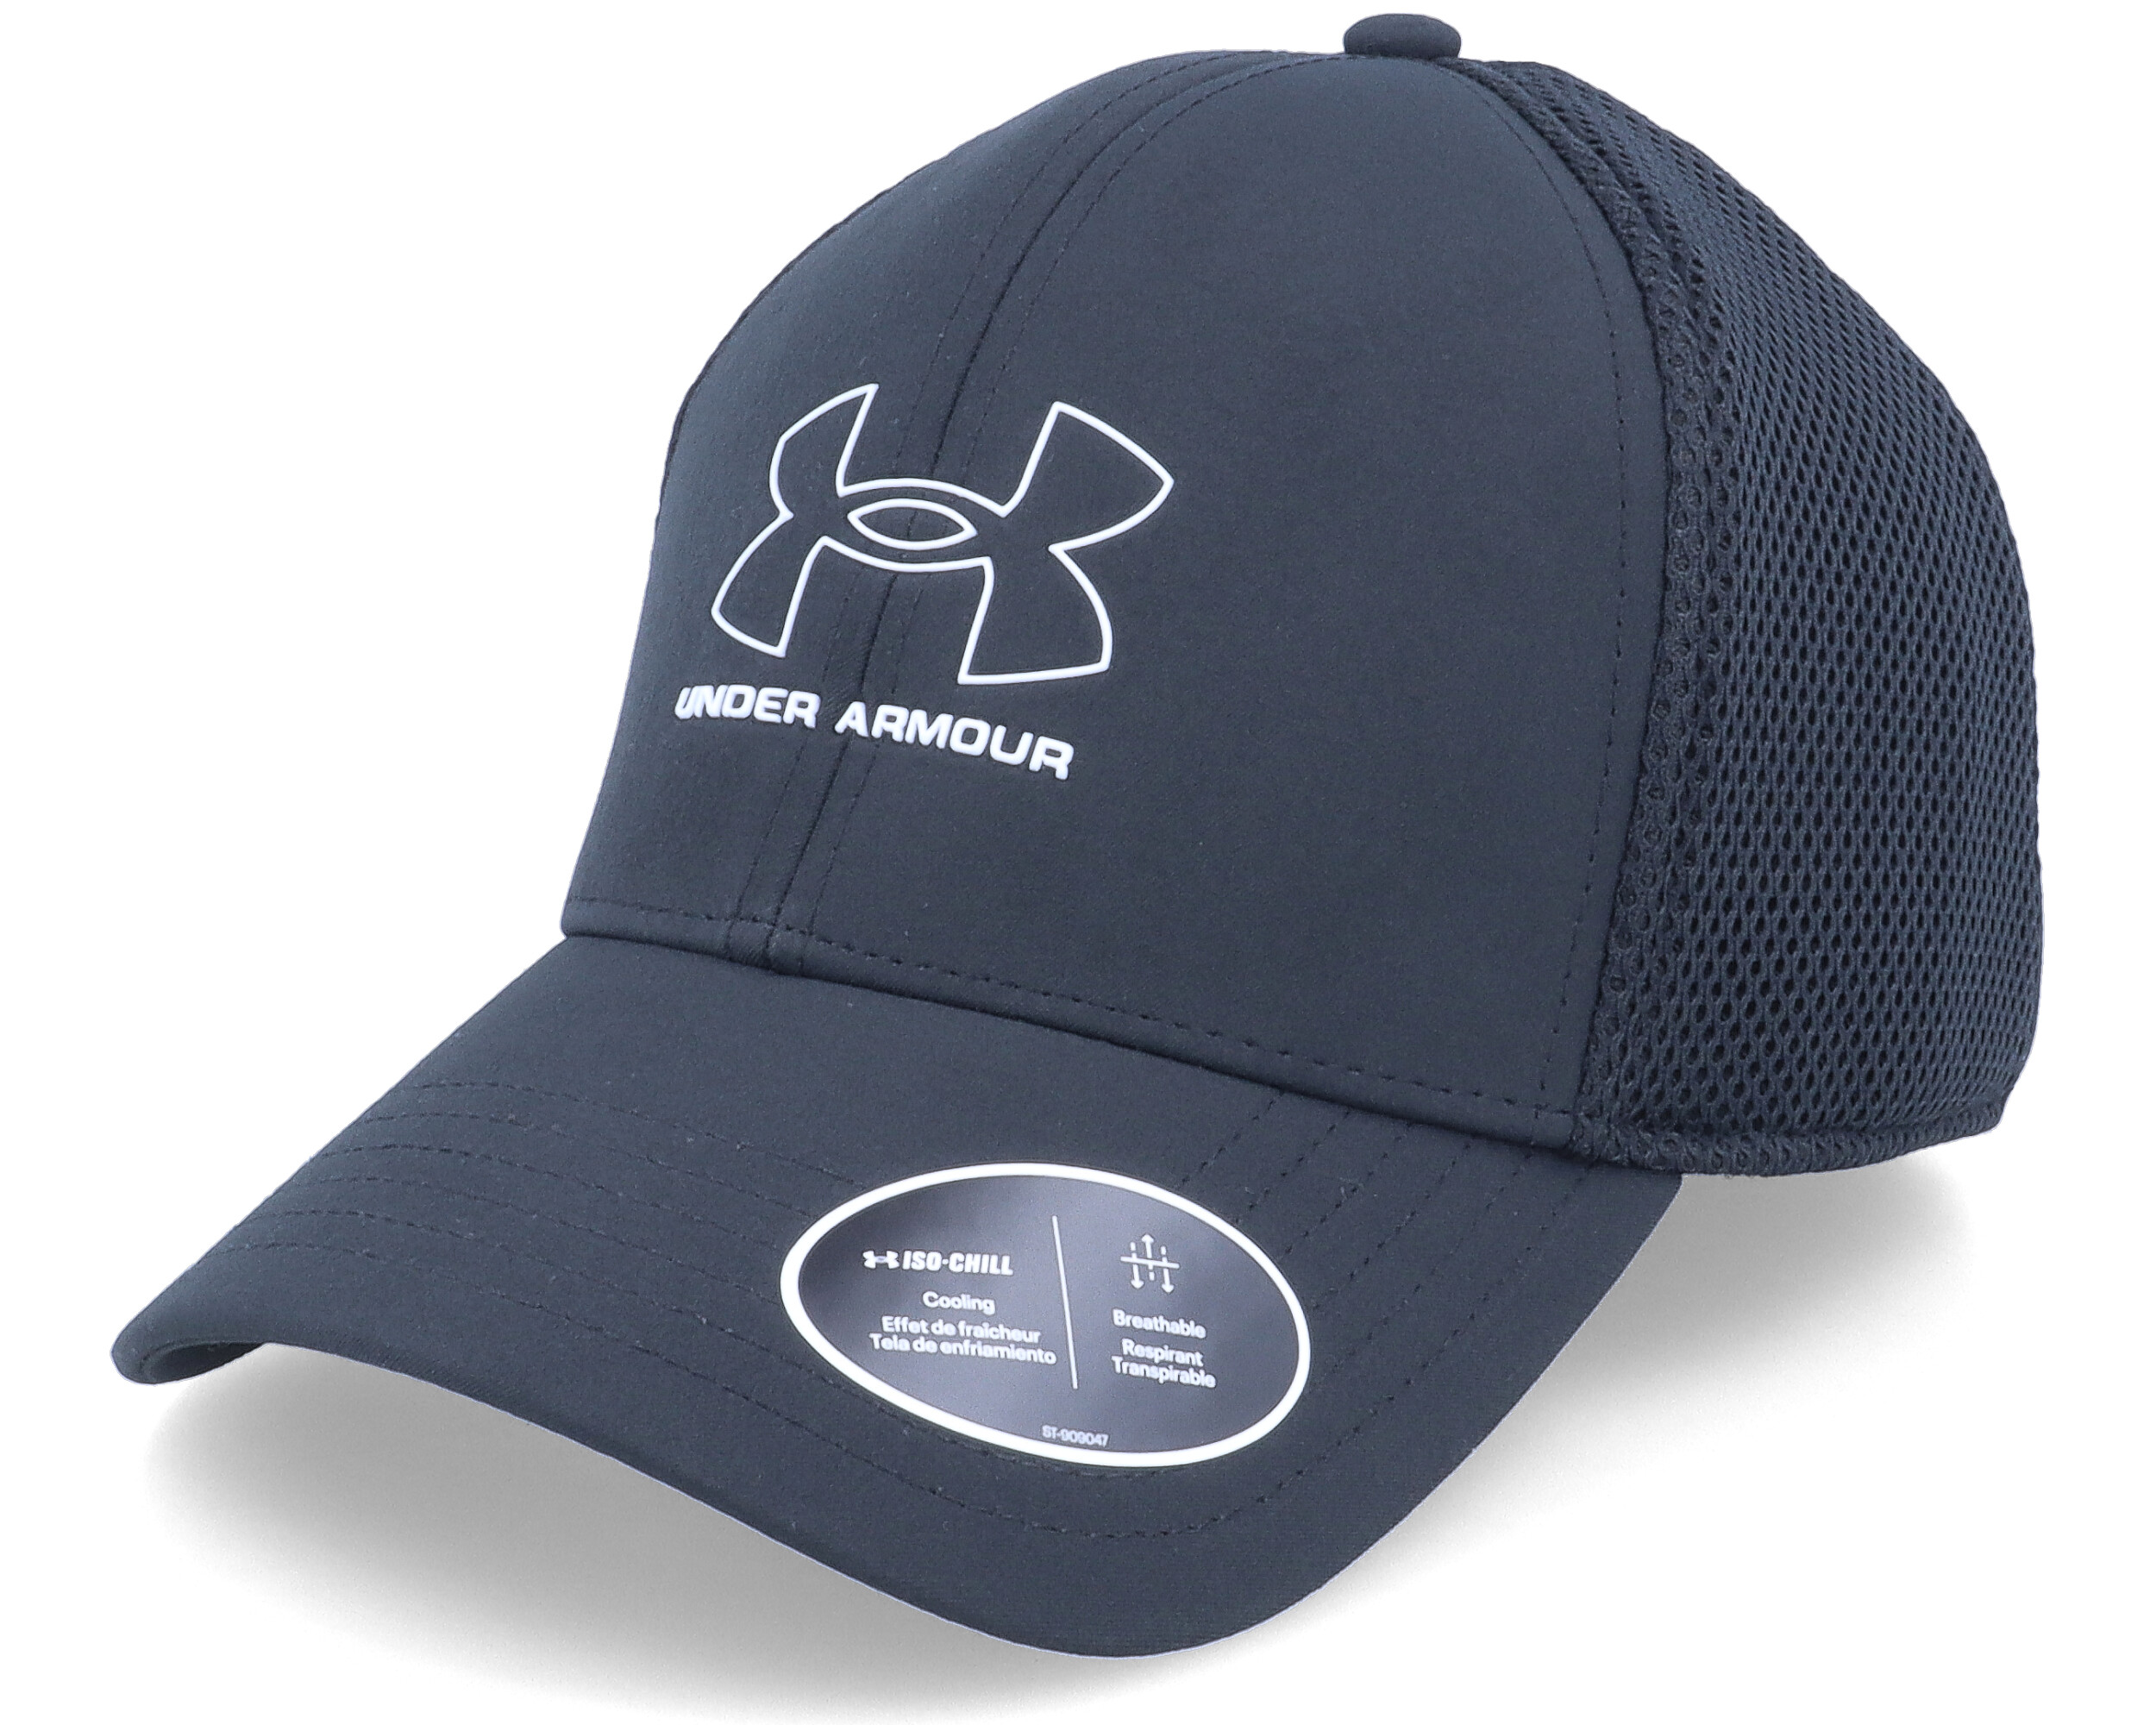 Under Armour Iso-Chill Driver Mesh Cap Black / M/L